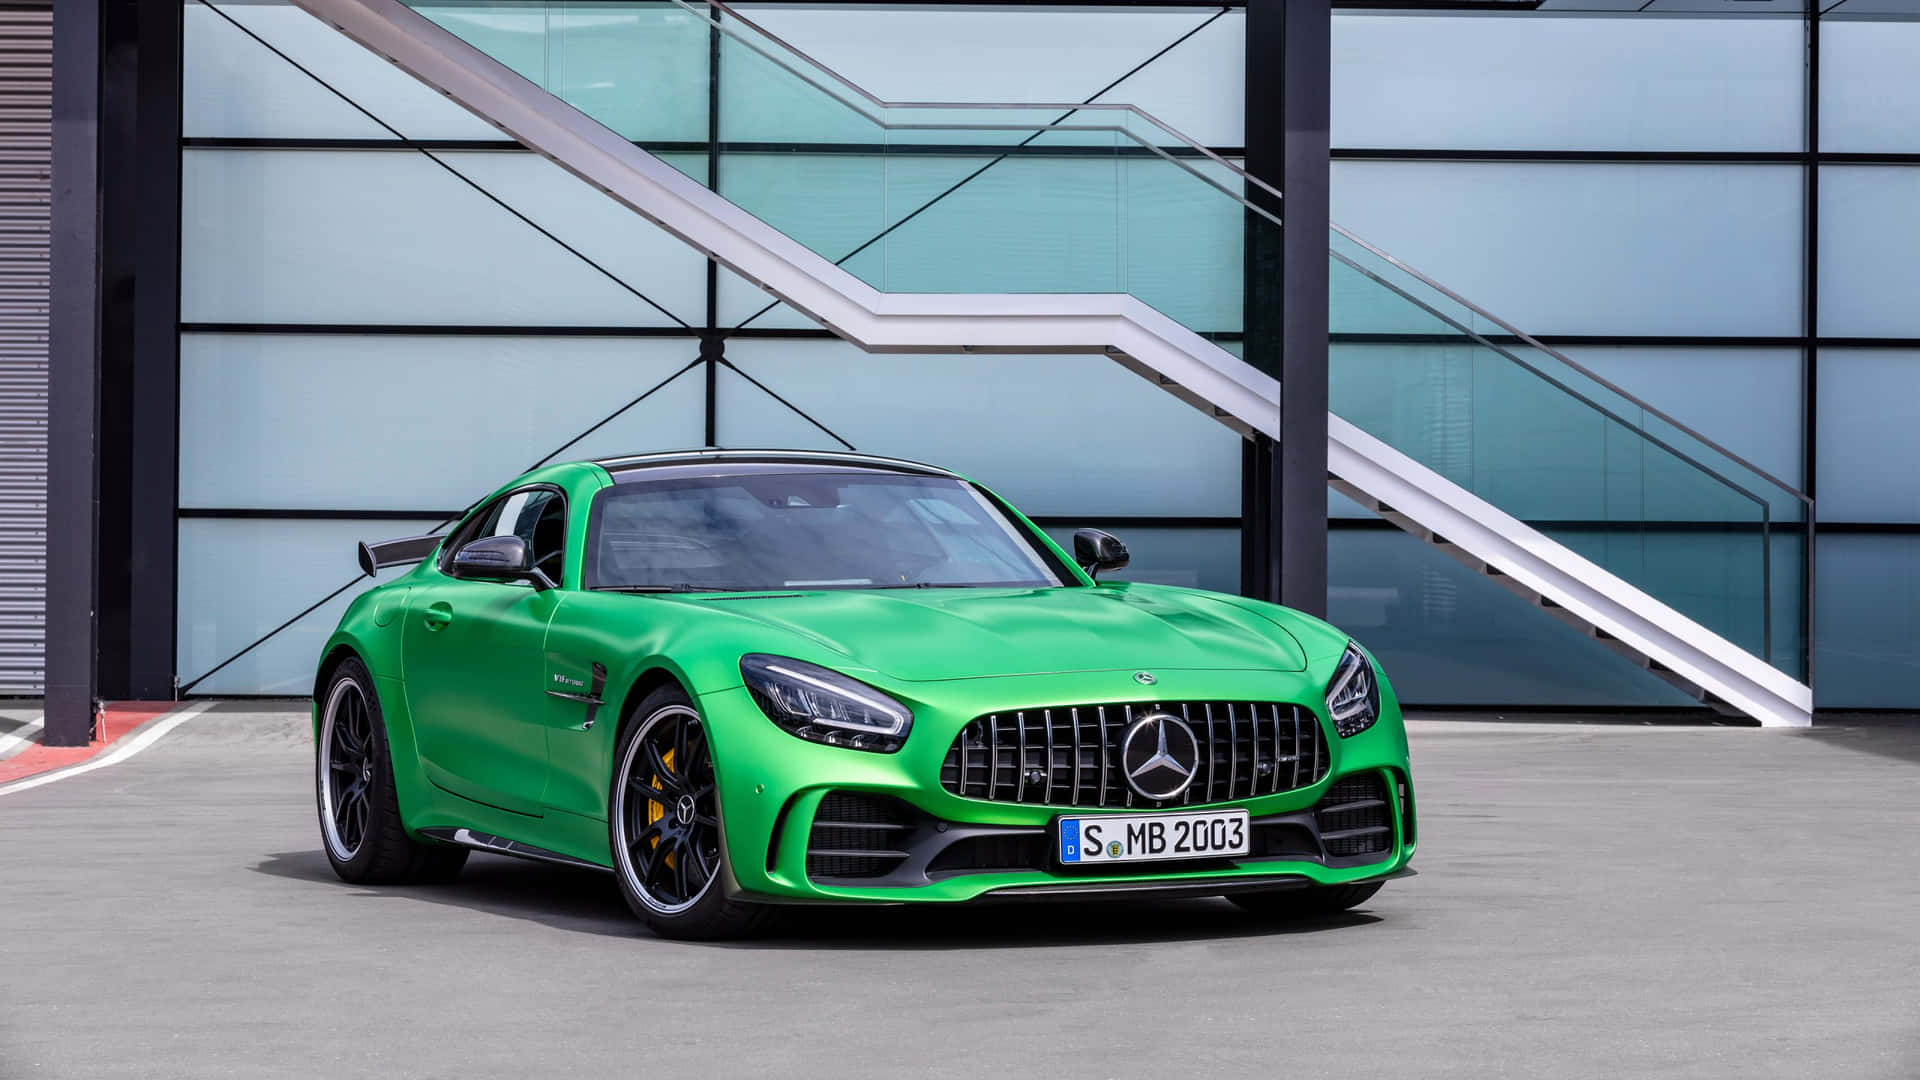 Captivating AMG GT R in Its Natural Environment